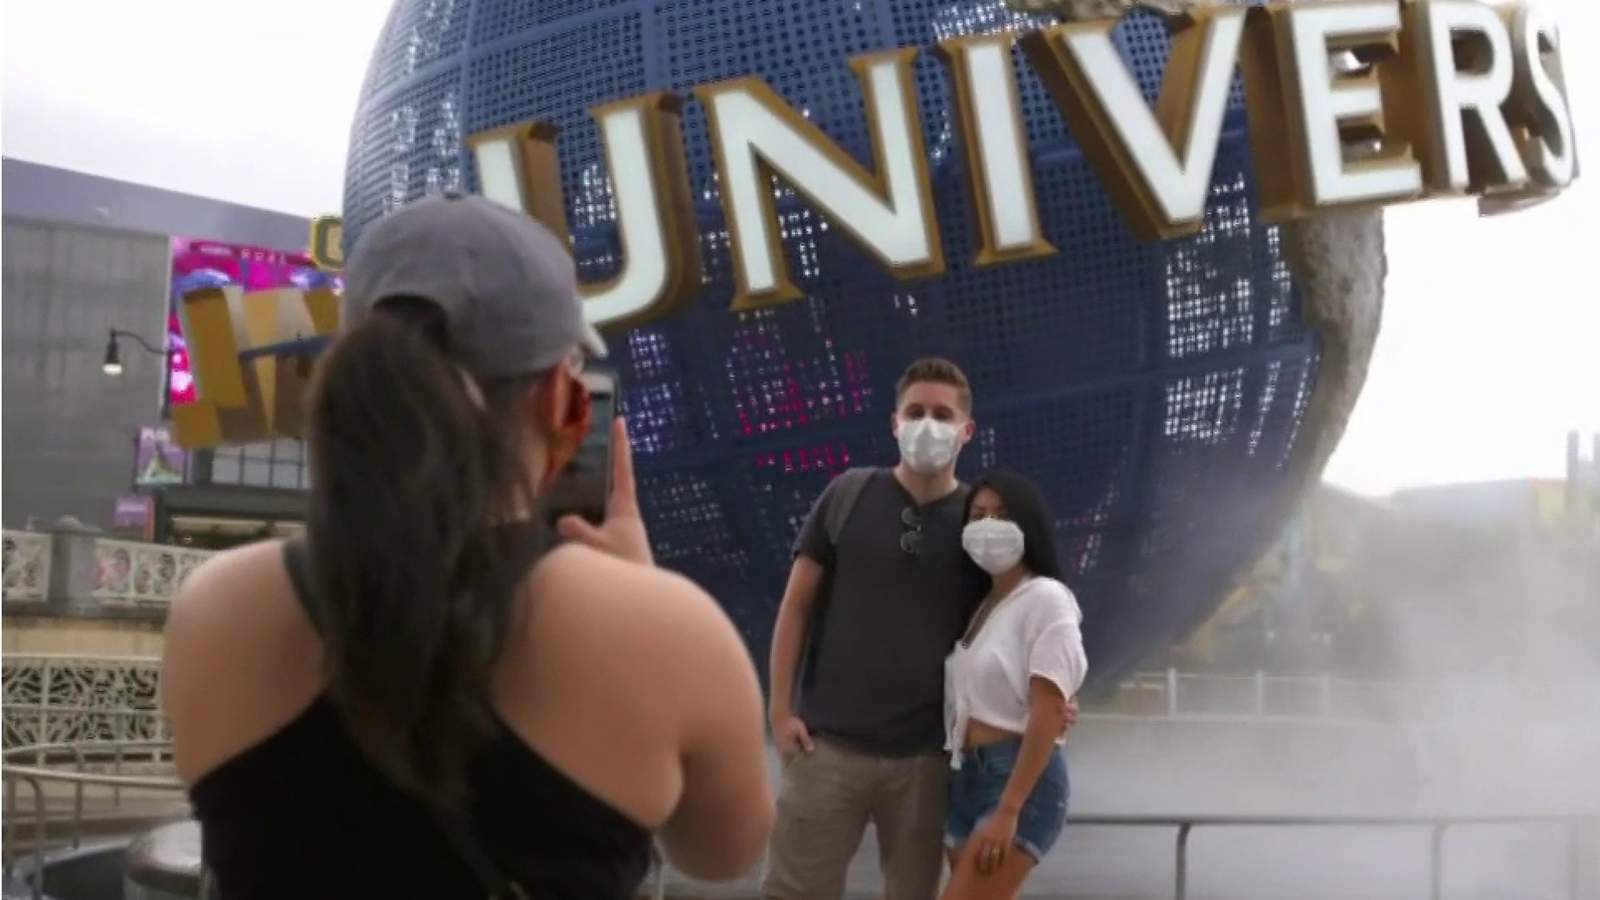 Universal announces another round of layoffs as coronavirus limits theme park attendance